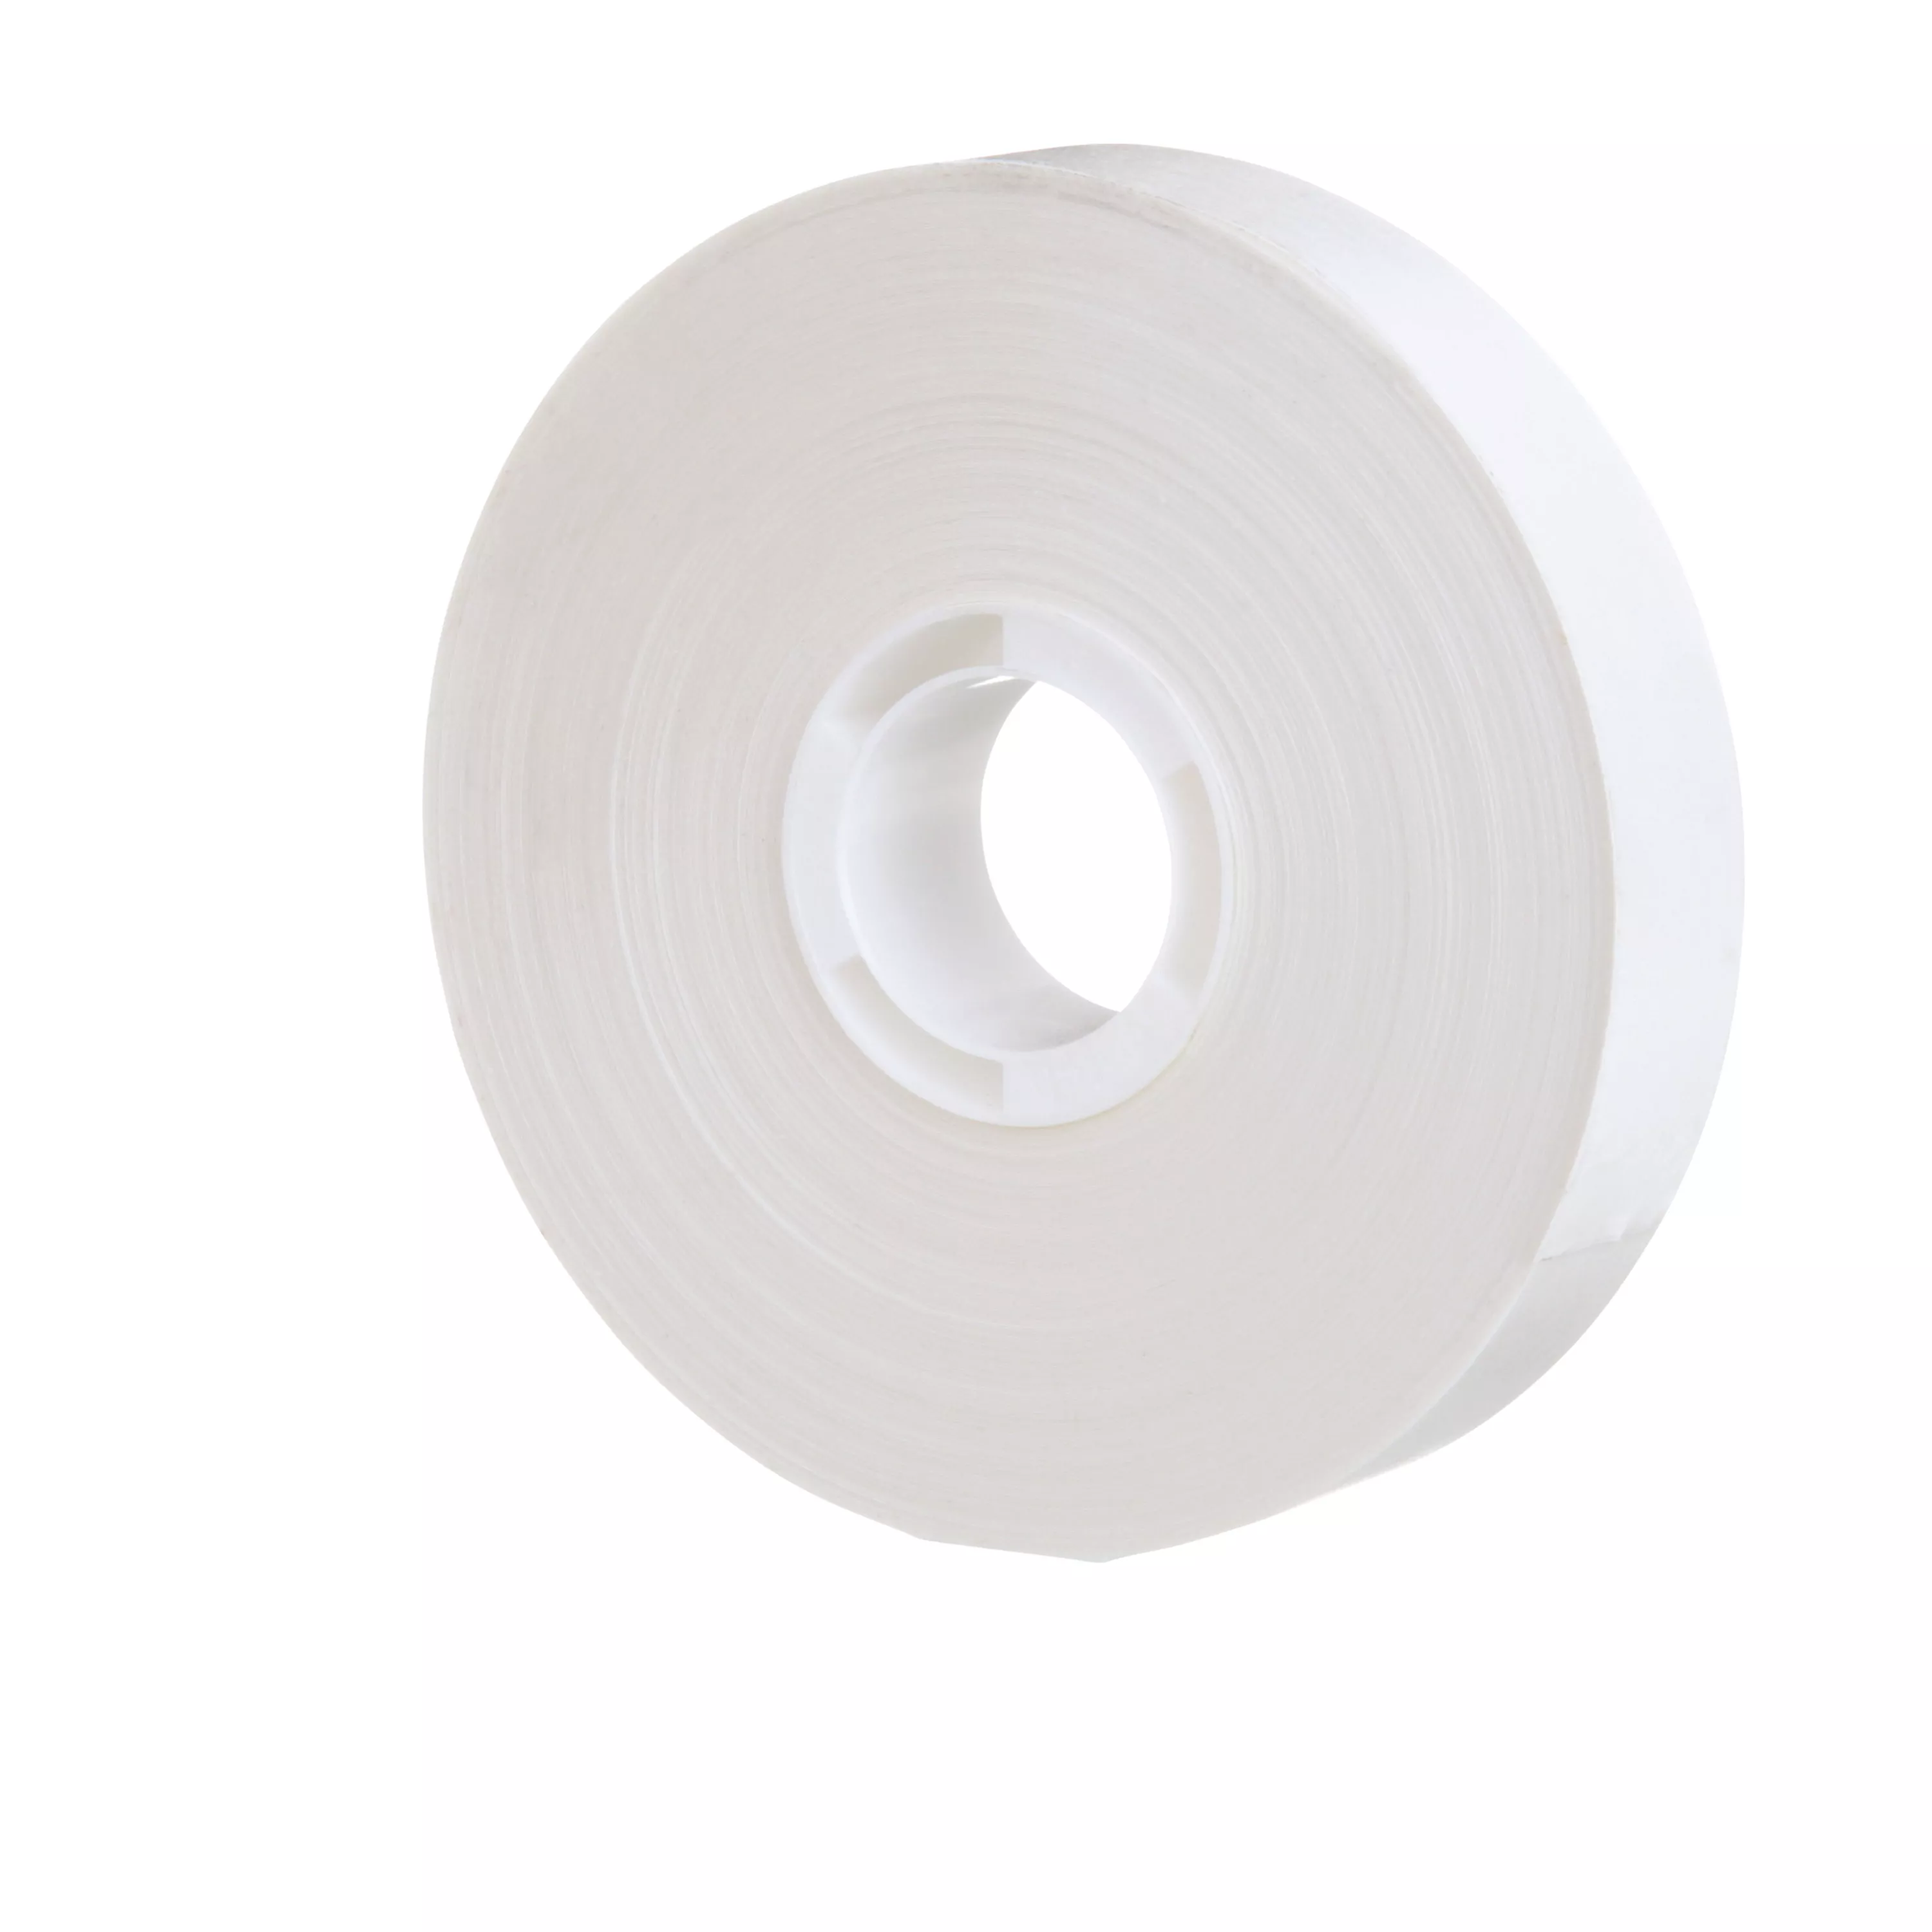 SKU 7000123437 | Scotch® ATG Repositionable Double Coated Tissue Tape 928